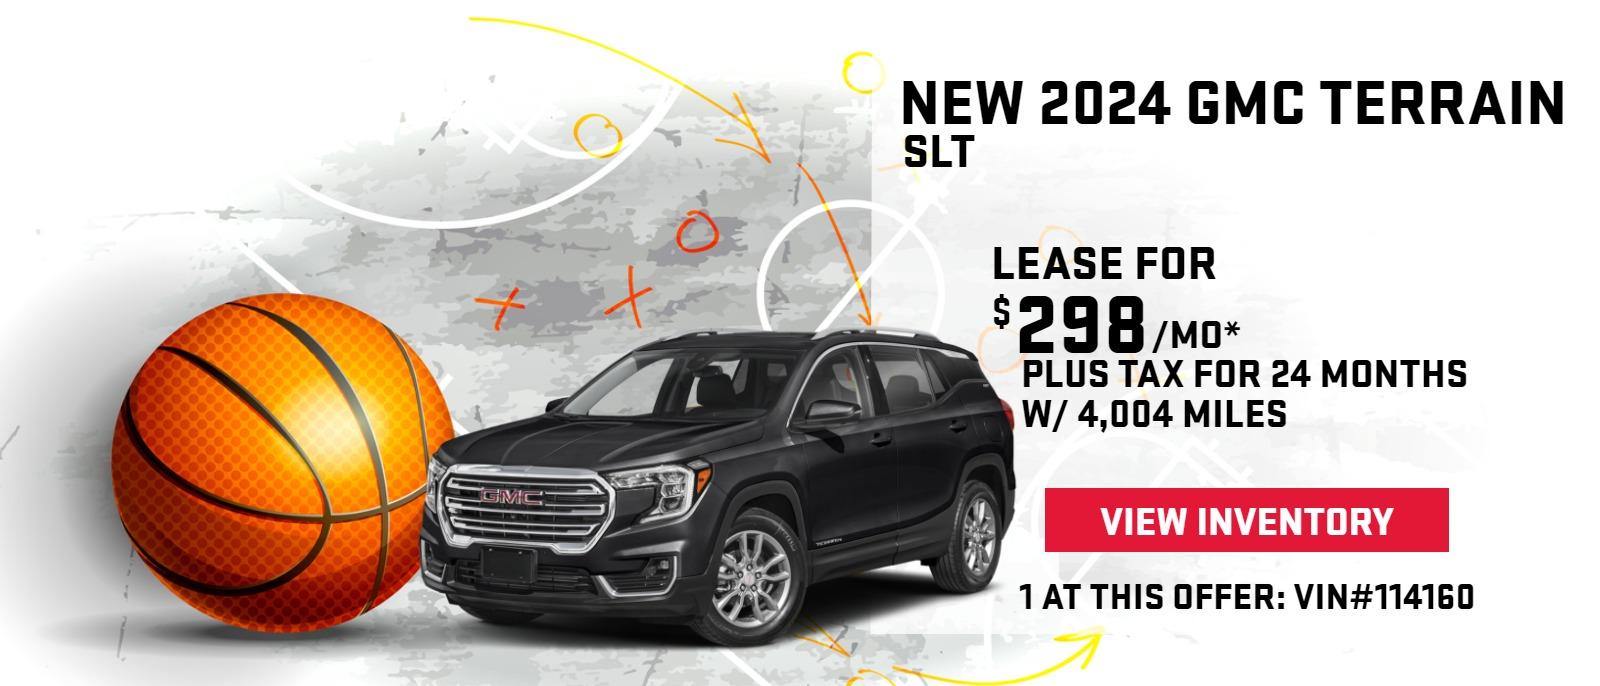 New 2024 GMC Terrain SLT
$298/mo* Lease + Tax for 24 Months
1 CTA at this offer. VIN #s 114160 w/ 4,004 miles.